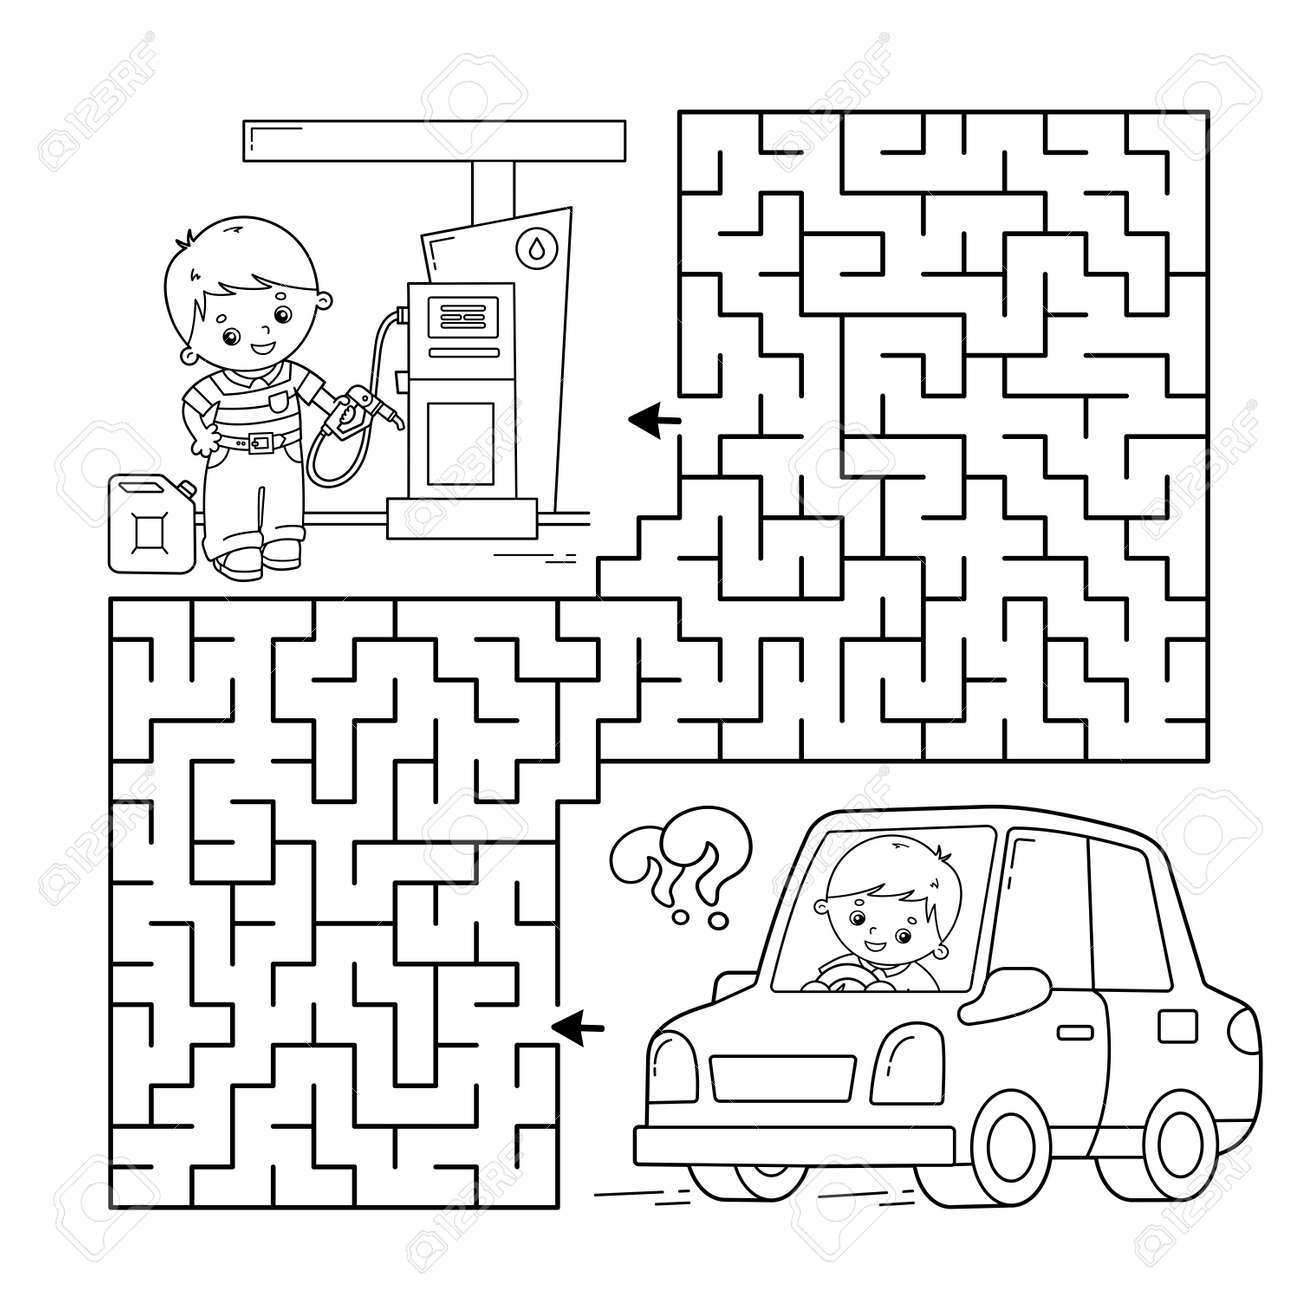 Maze or labyrinth game puzzle coloring page outline of cartoon car with driver on petrol station transport or vehicle coloring book for kids royalty free svg cliparts vectors and stock illustration image